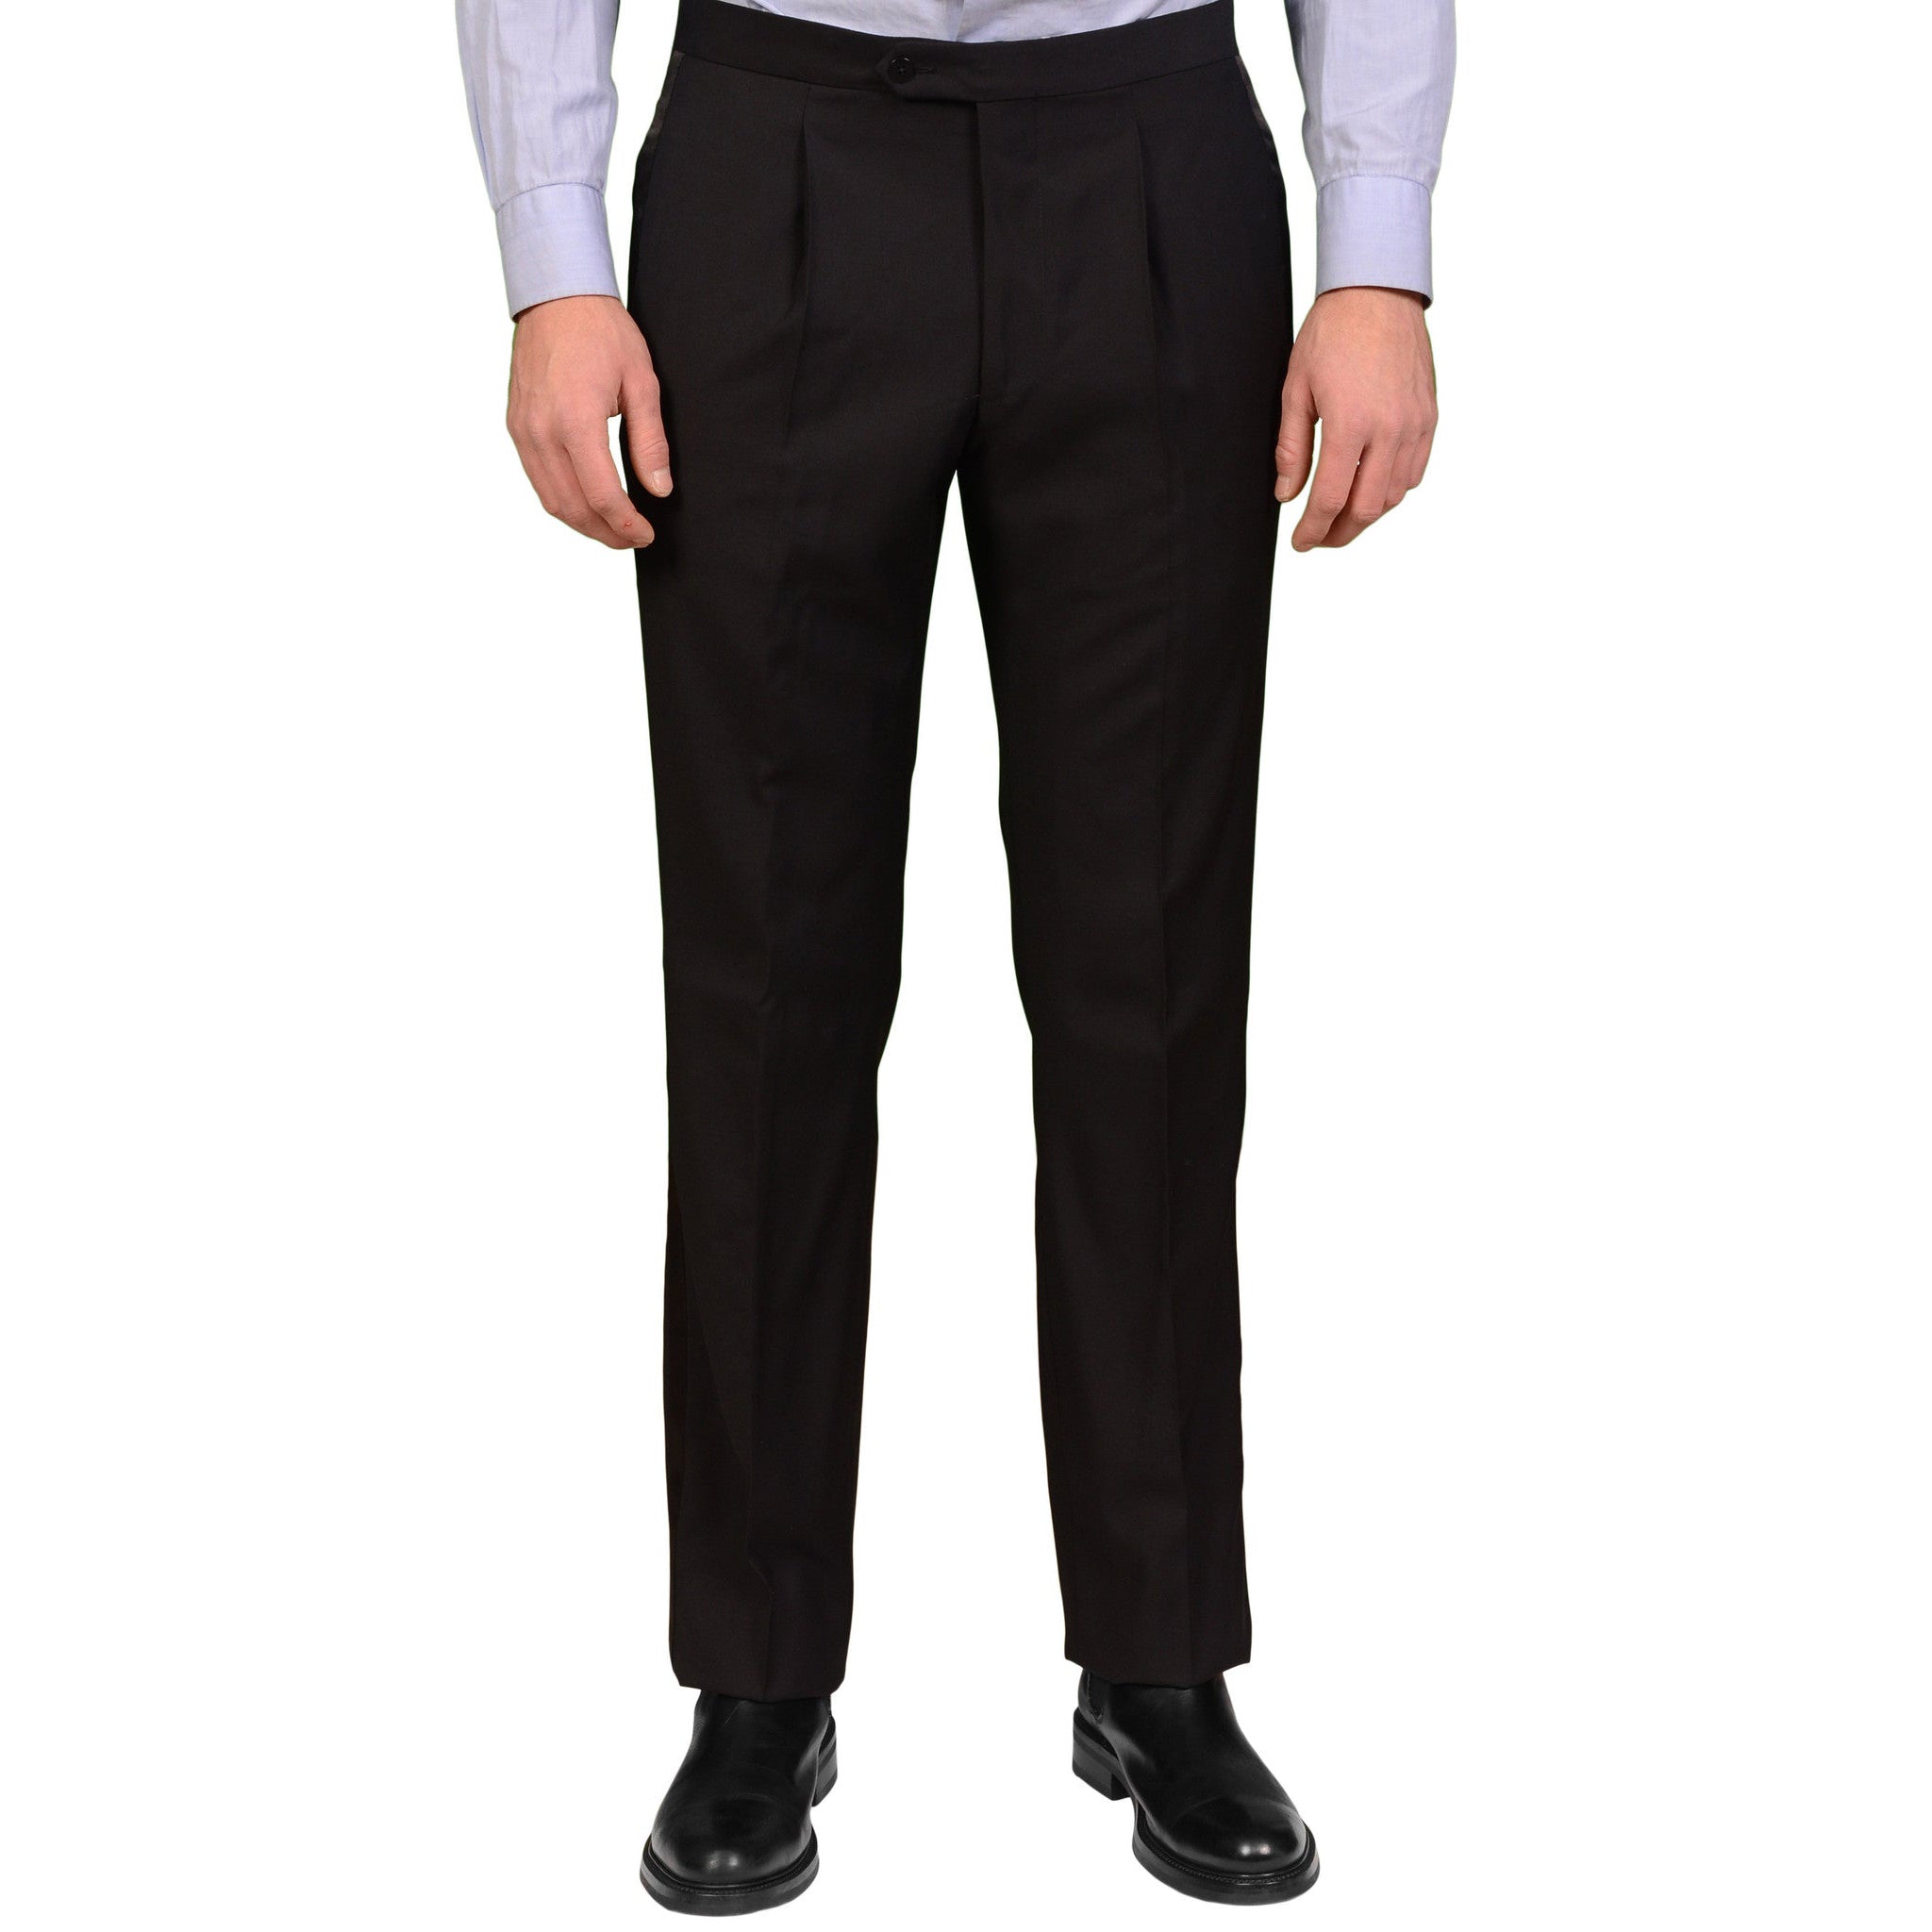 ADRIANO FRACASSI Black Wool Single Pleated Dress Pants 34 NEW 50 Classic Fit ADRIANO FRACASSI